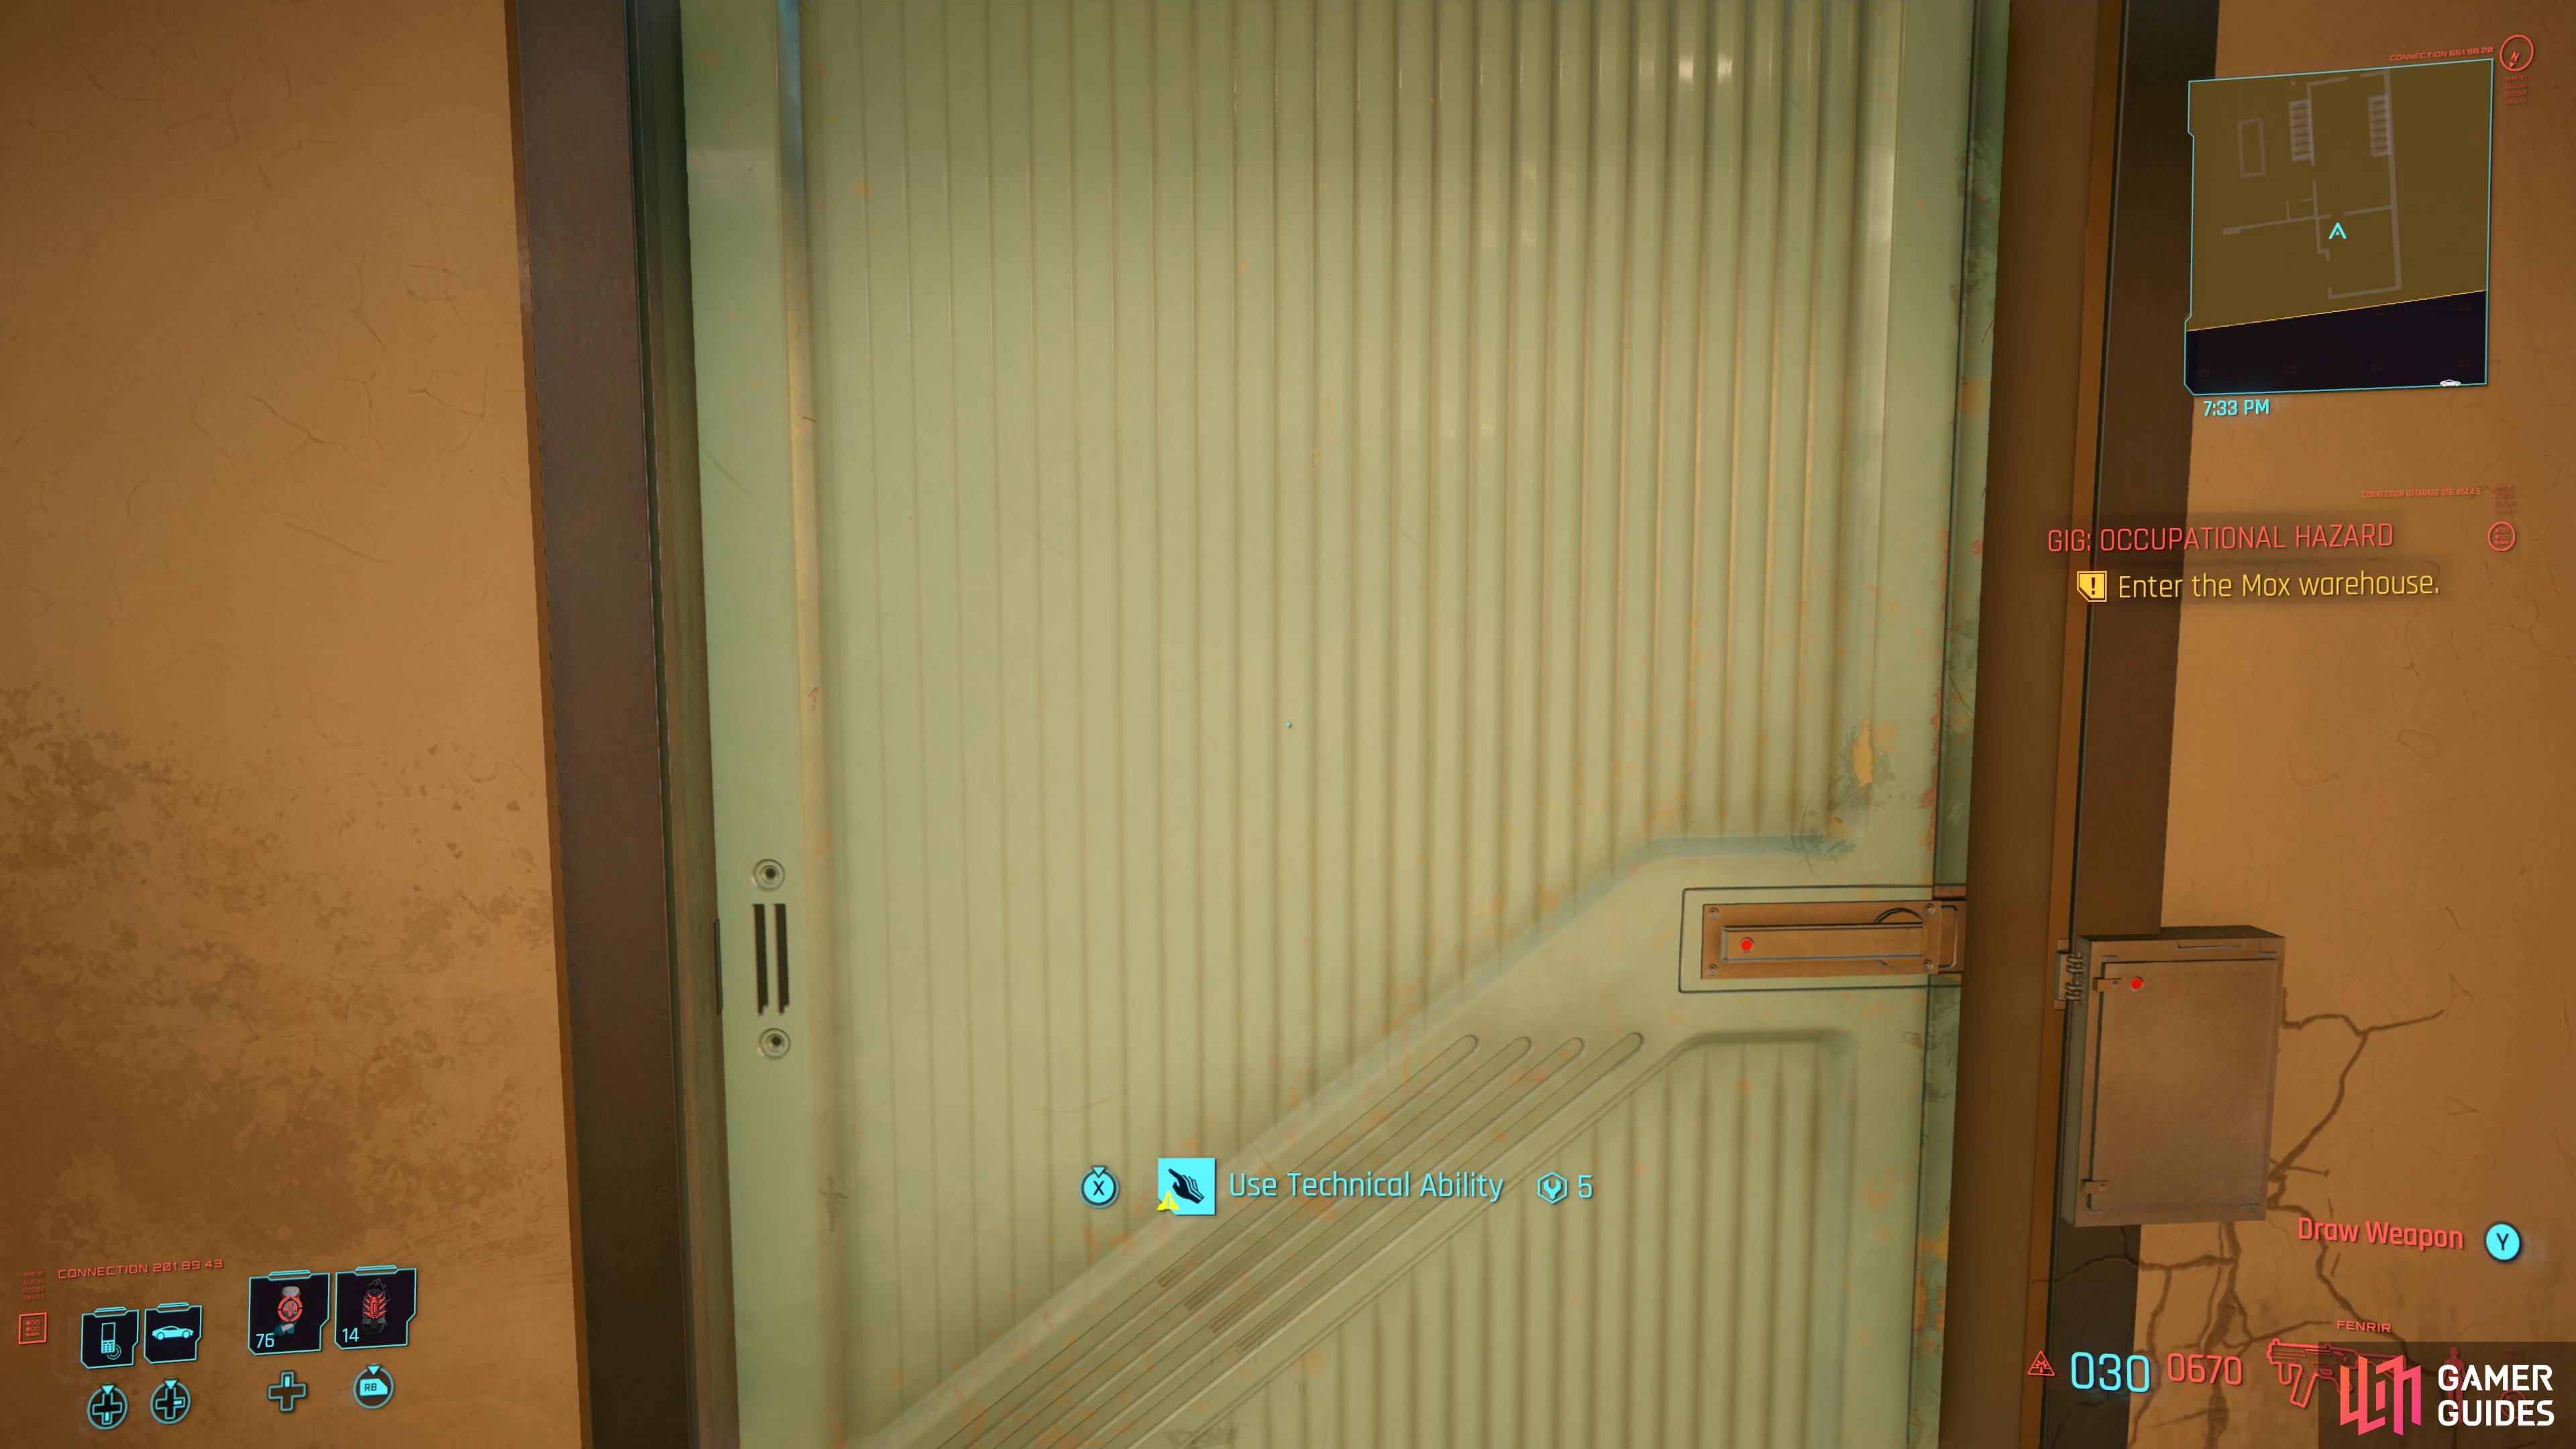 Although you can stroll through the open door thanks to the Technical Skill